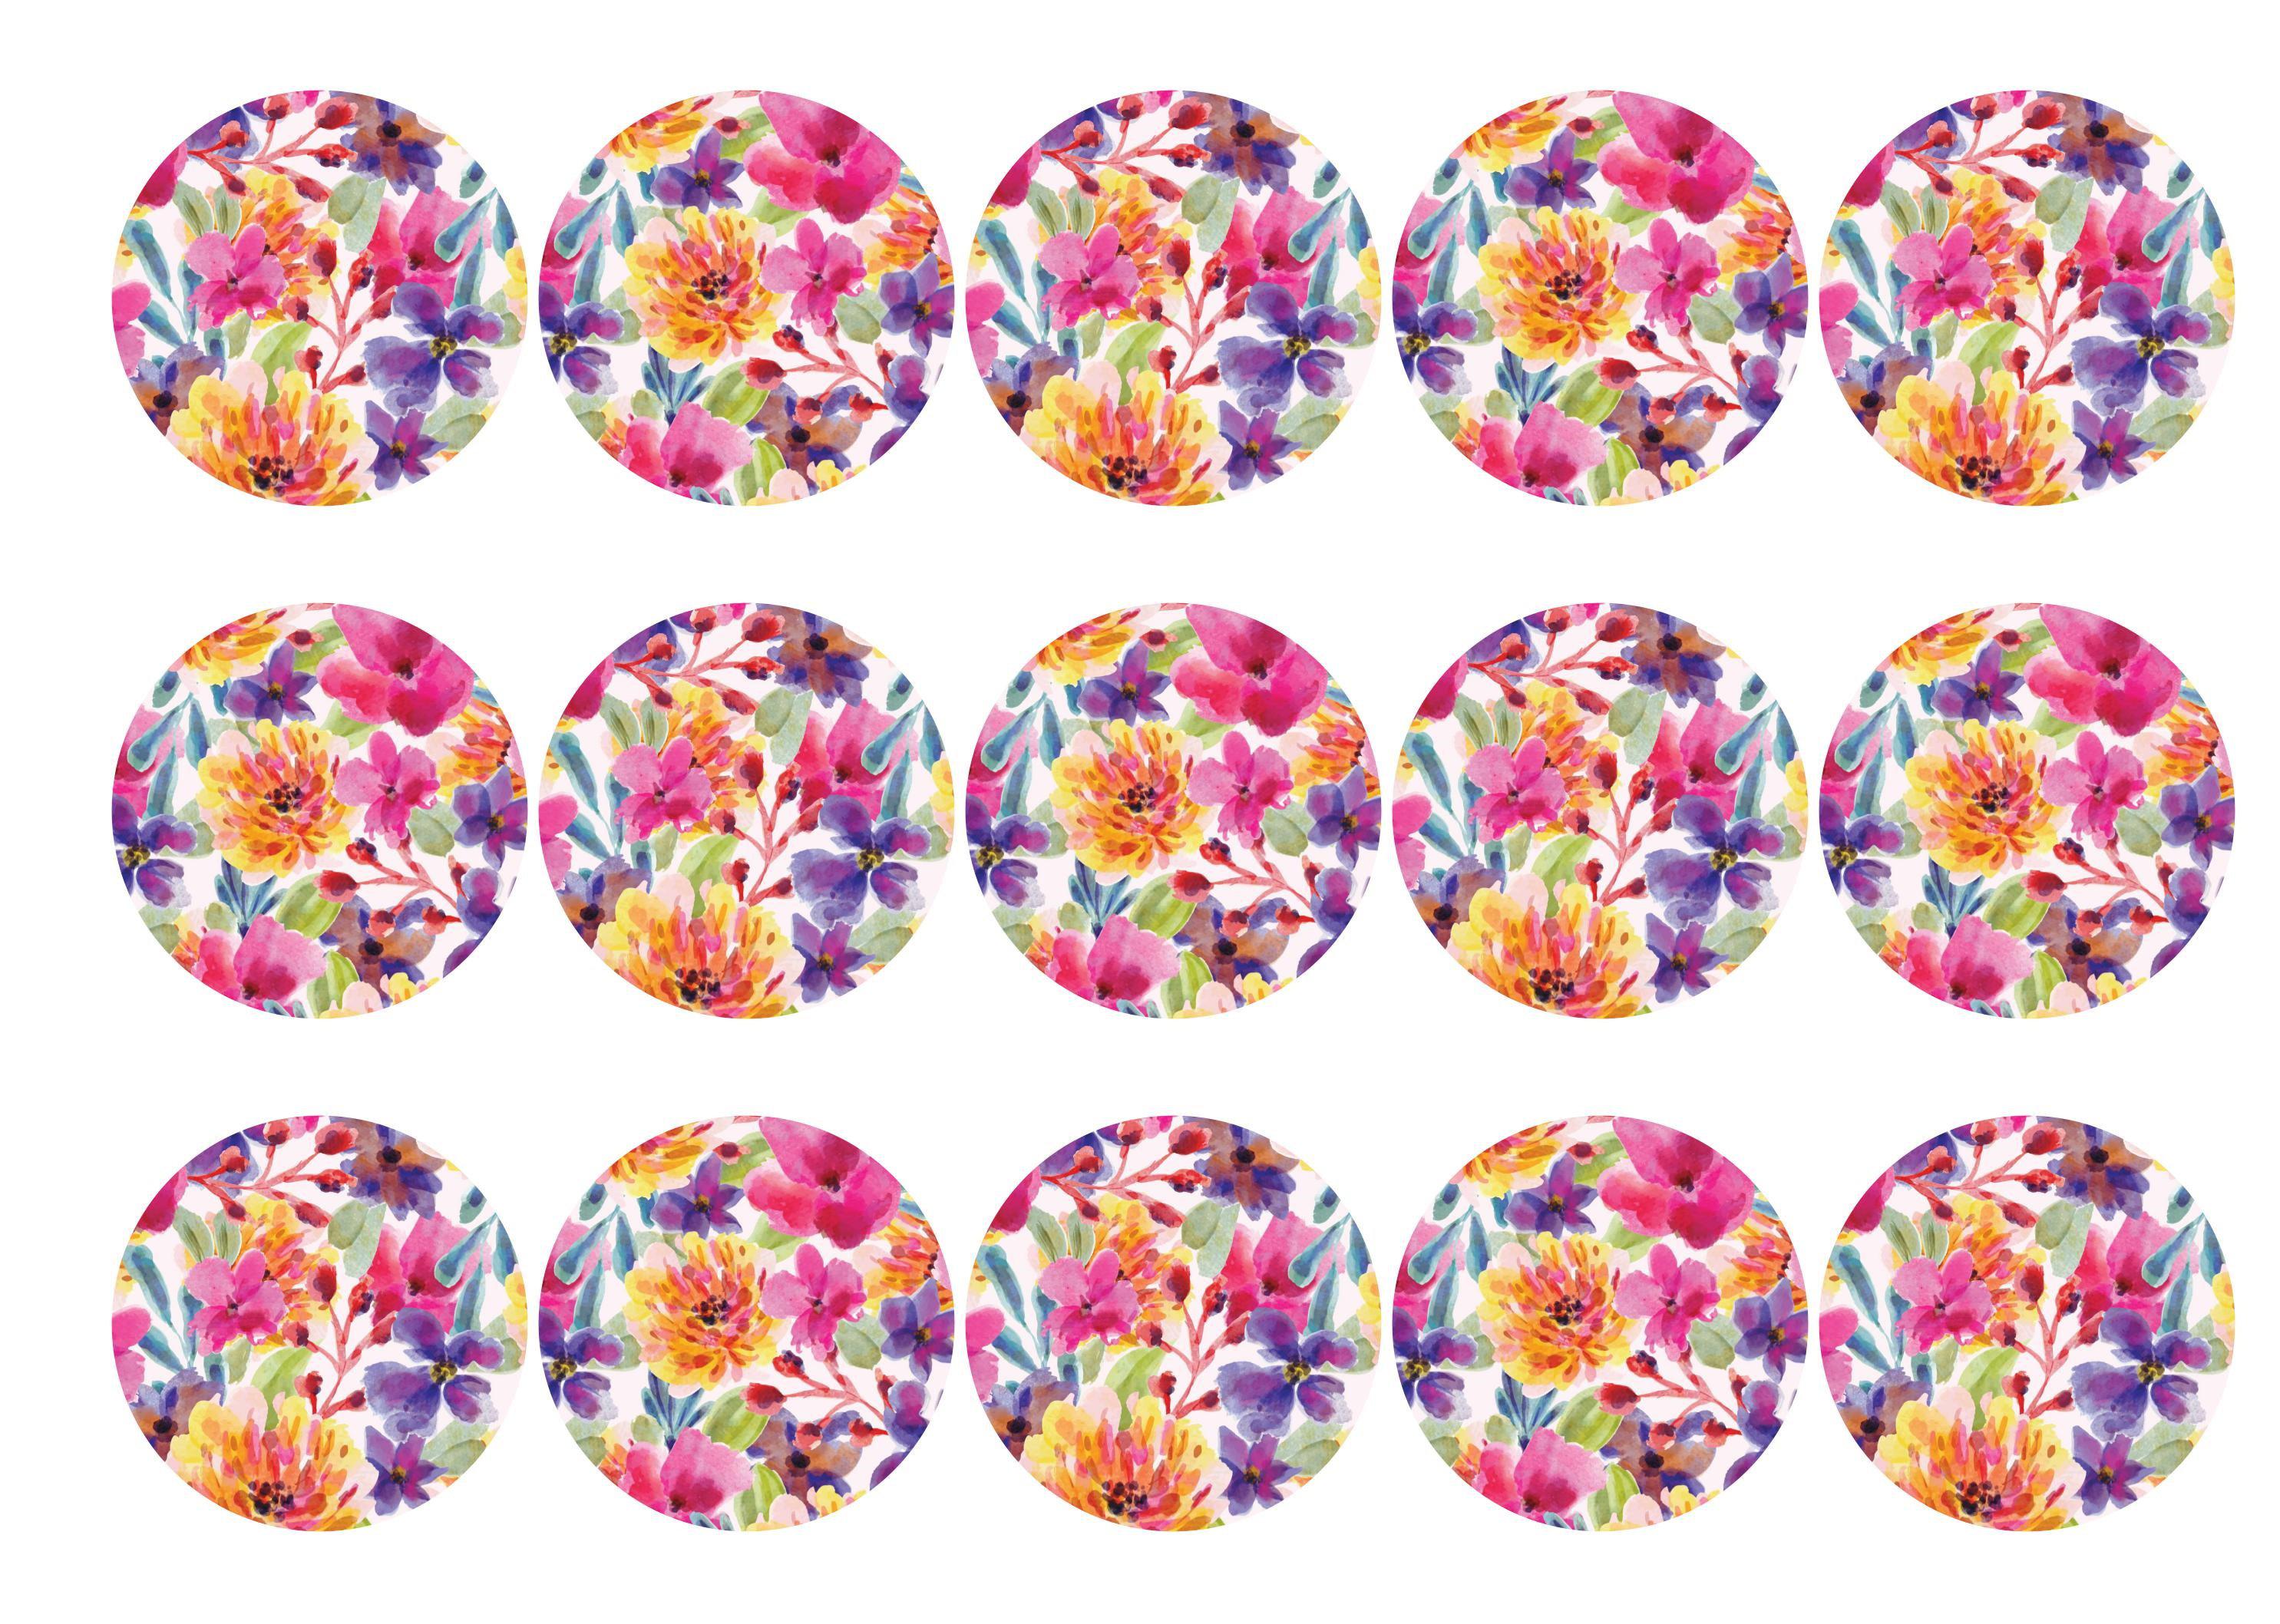 15 printed toppers in a bright floral design